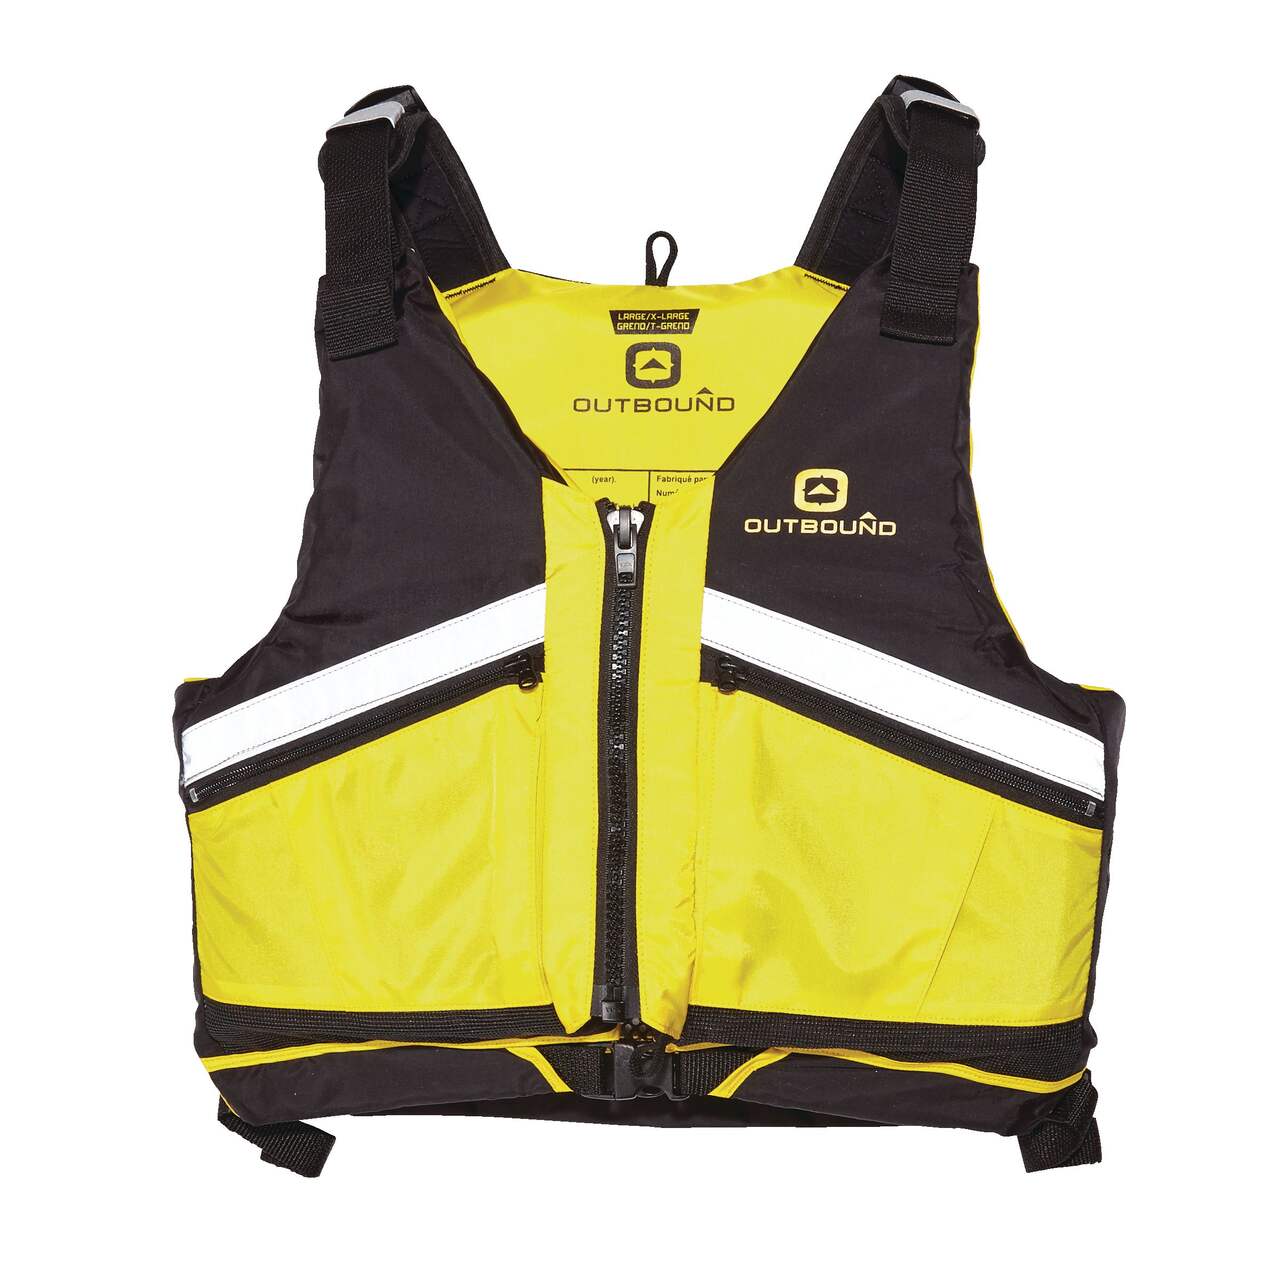 Outbound Comfort PFD/Paddling Vest, Assorted Sizes